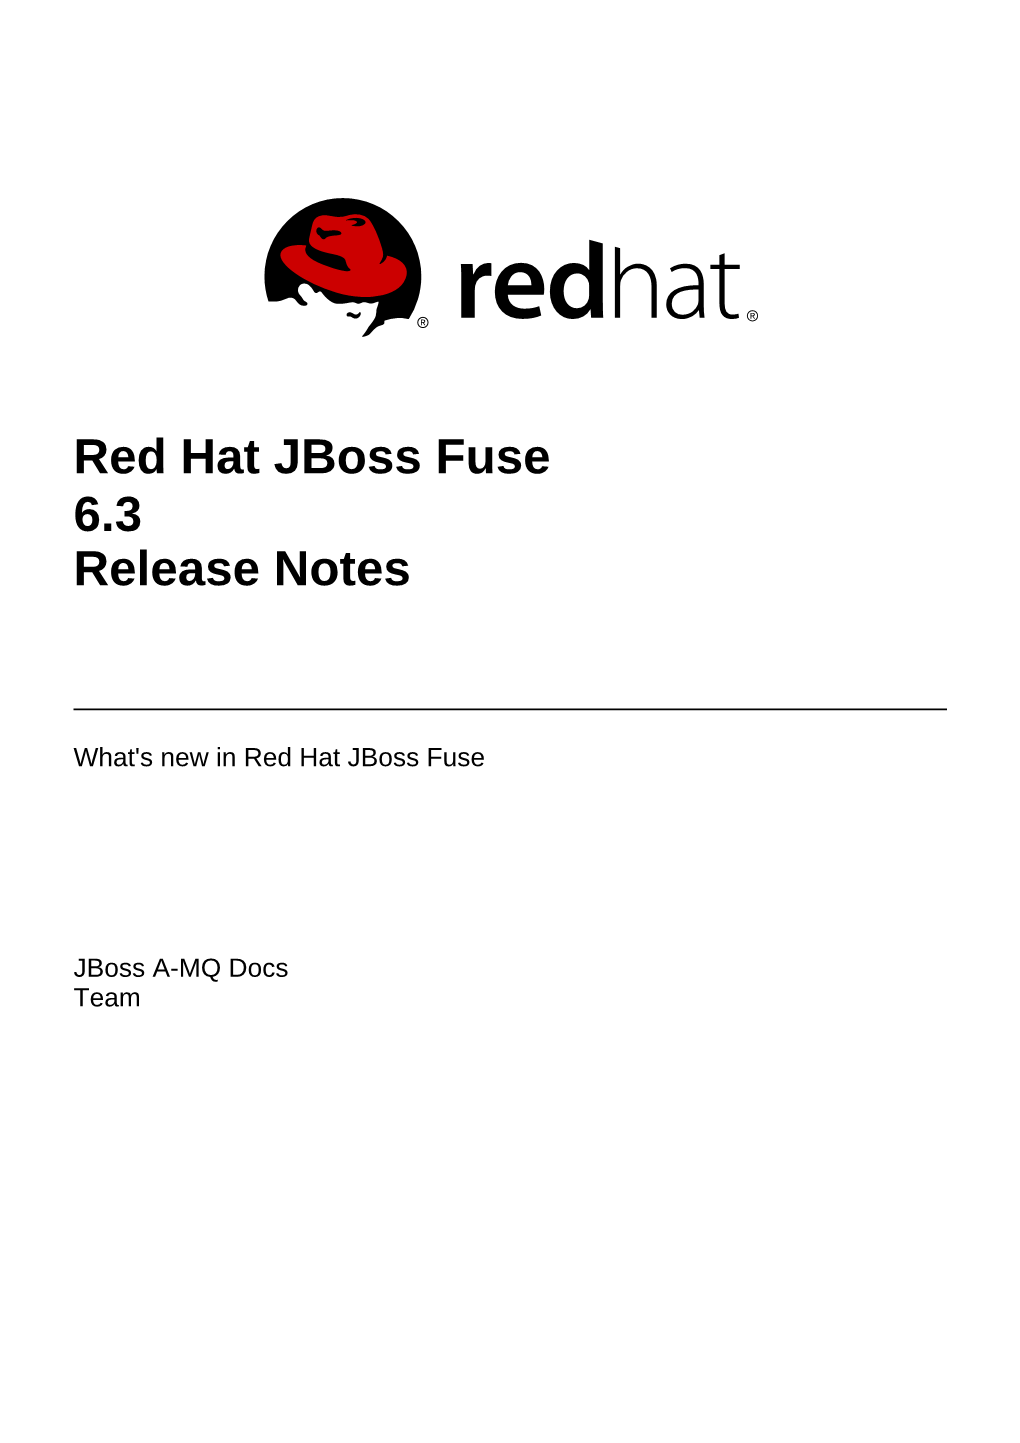 Red Hat Jboss Fuse 6.3 Release Notes